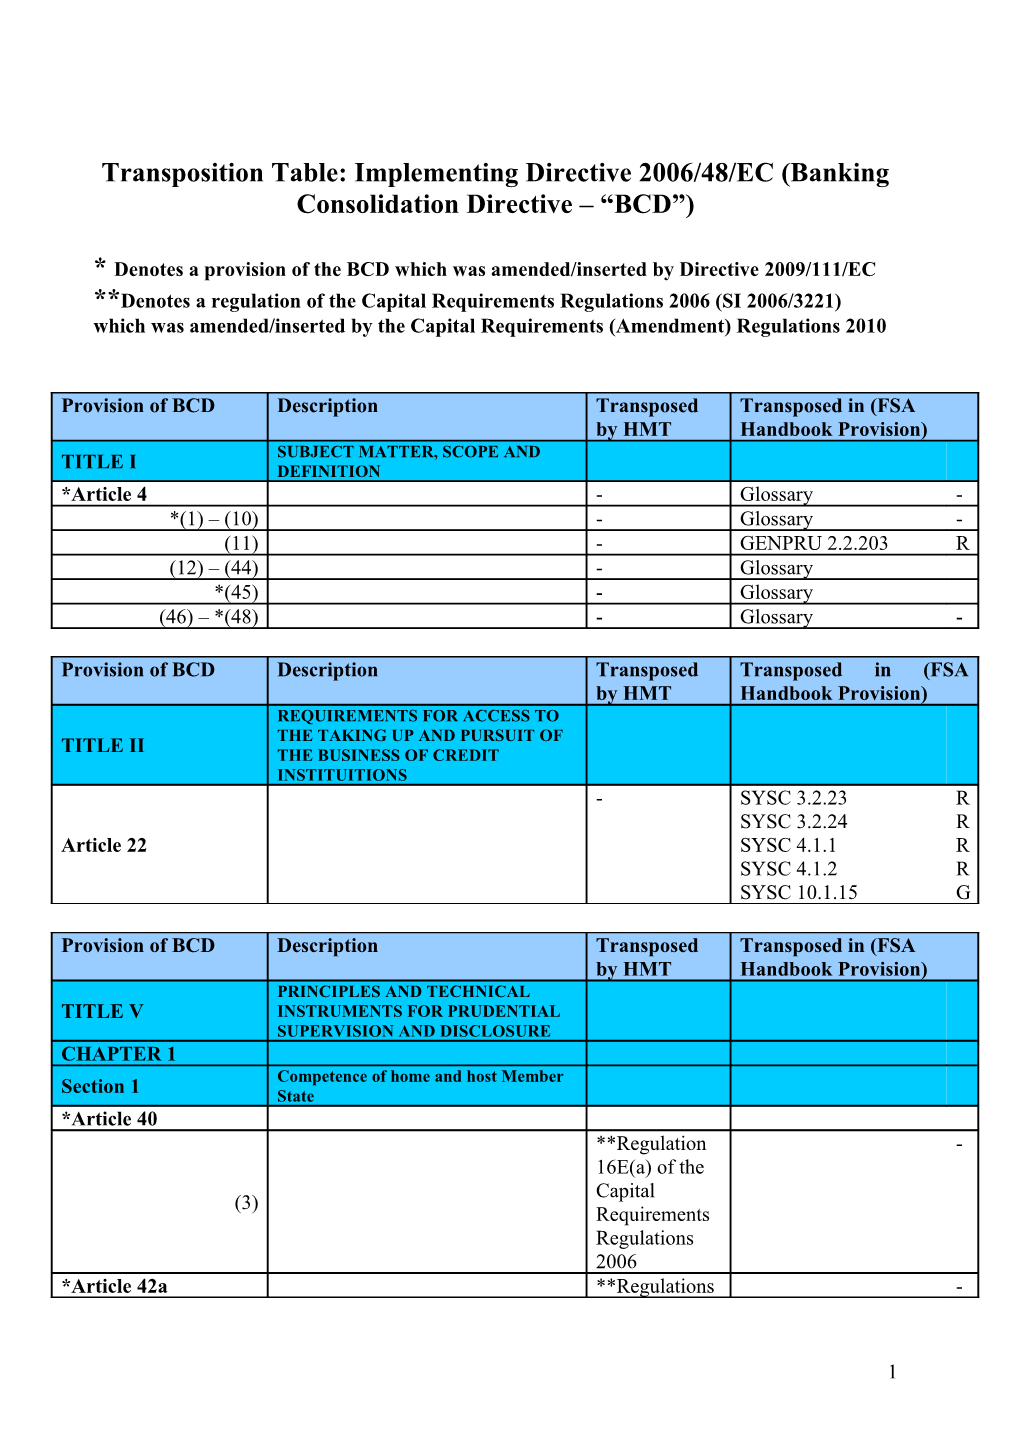 Transposition Table: Implementing Directive 2006/48/EC (Banking Consolidation Directive BCD )